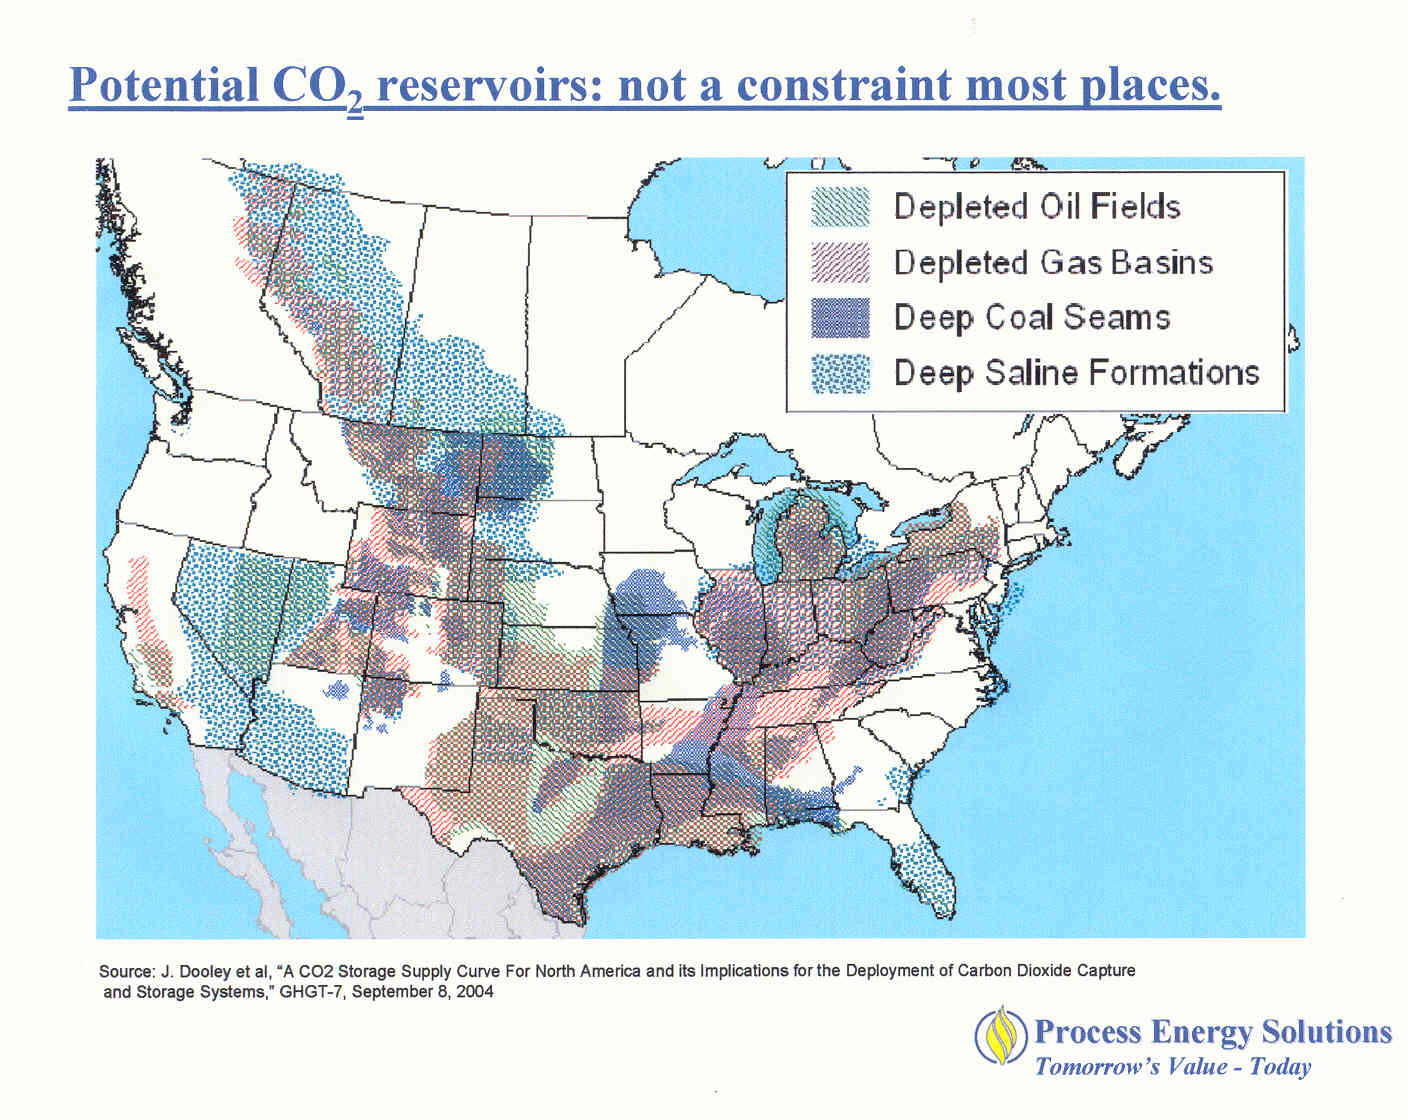 Sequestration - Potential CO2 reservoirs.jpg